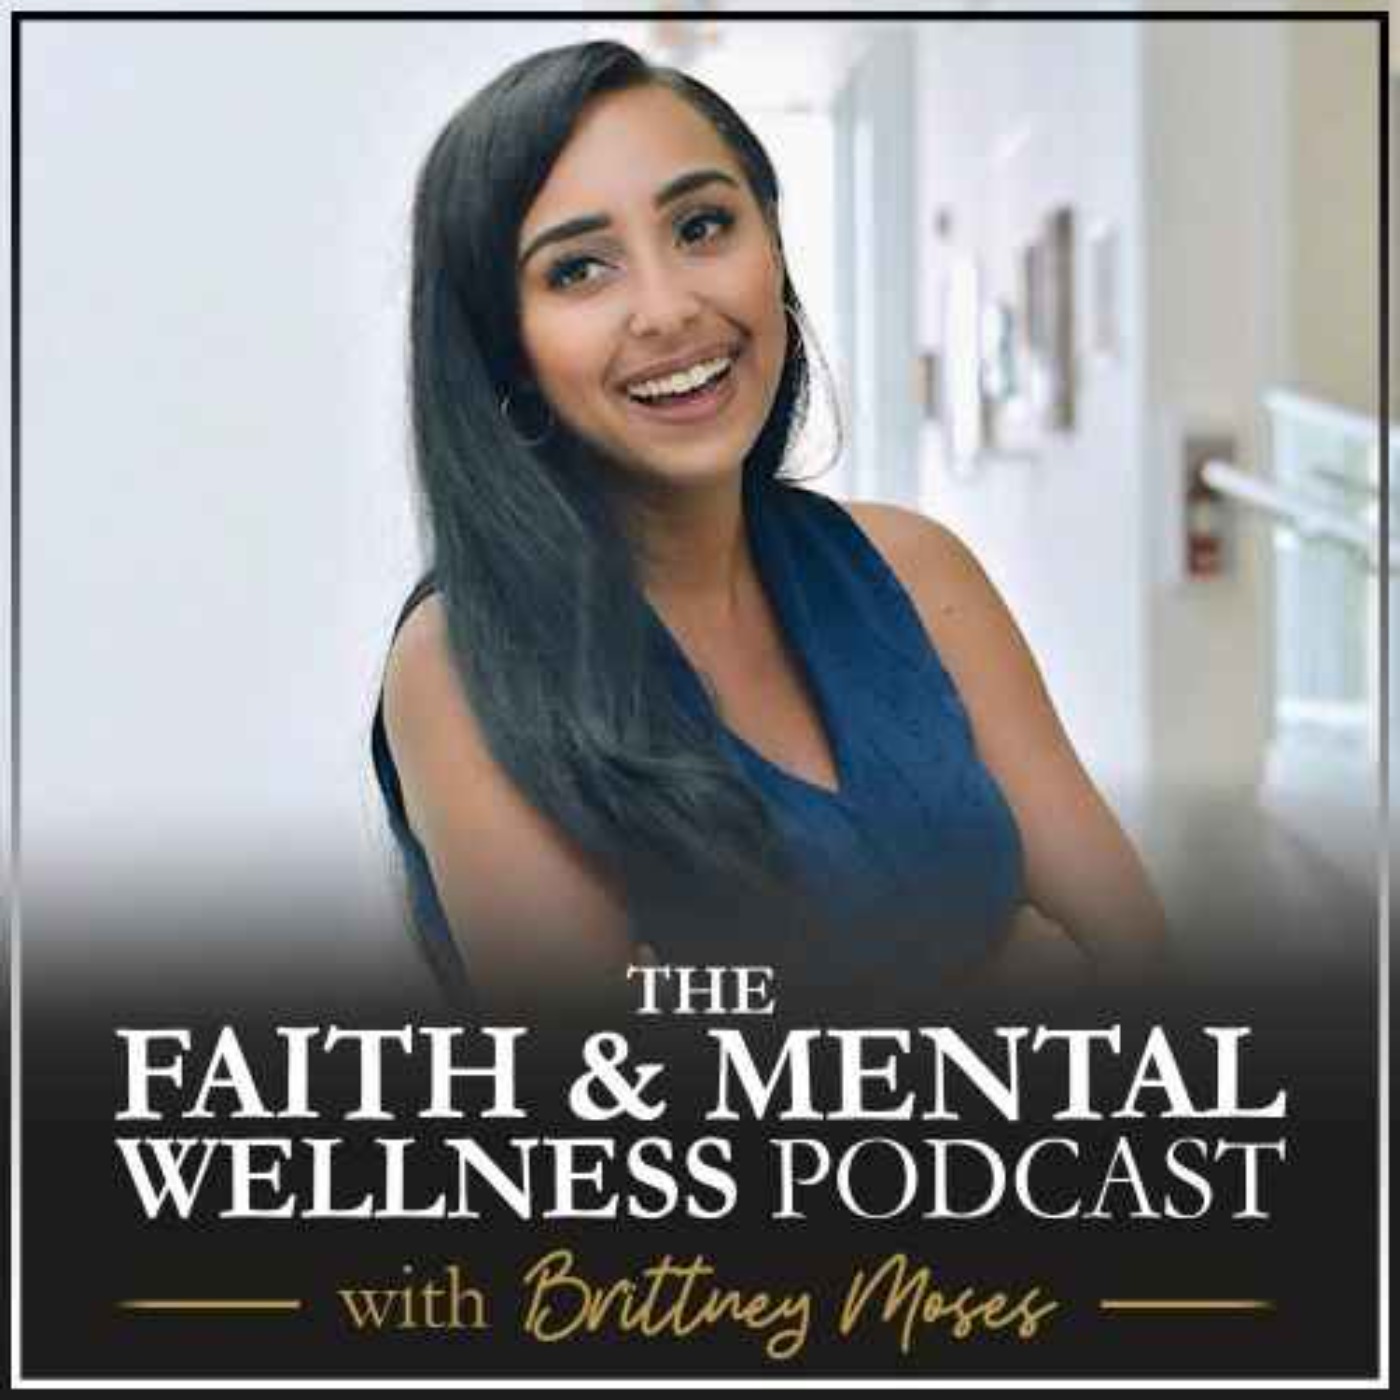 043: Addressing Common Stigmas About Faith & Mental Health with Hannah Brencher